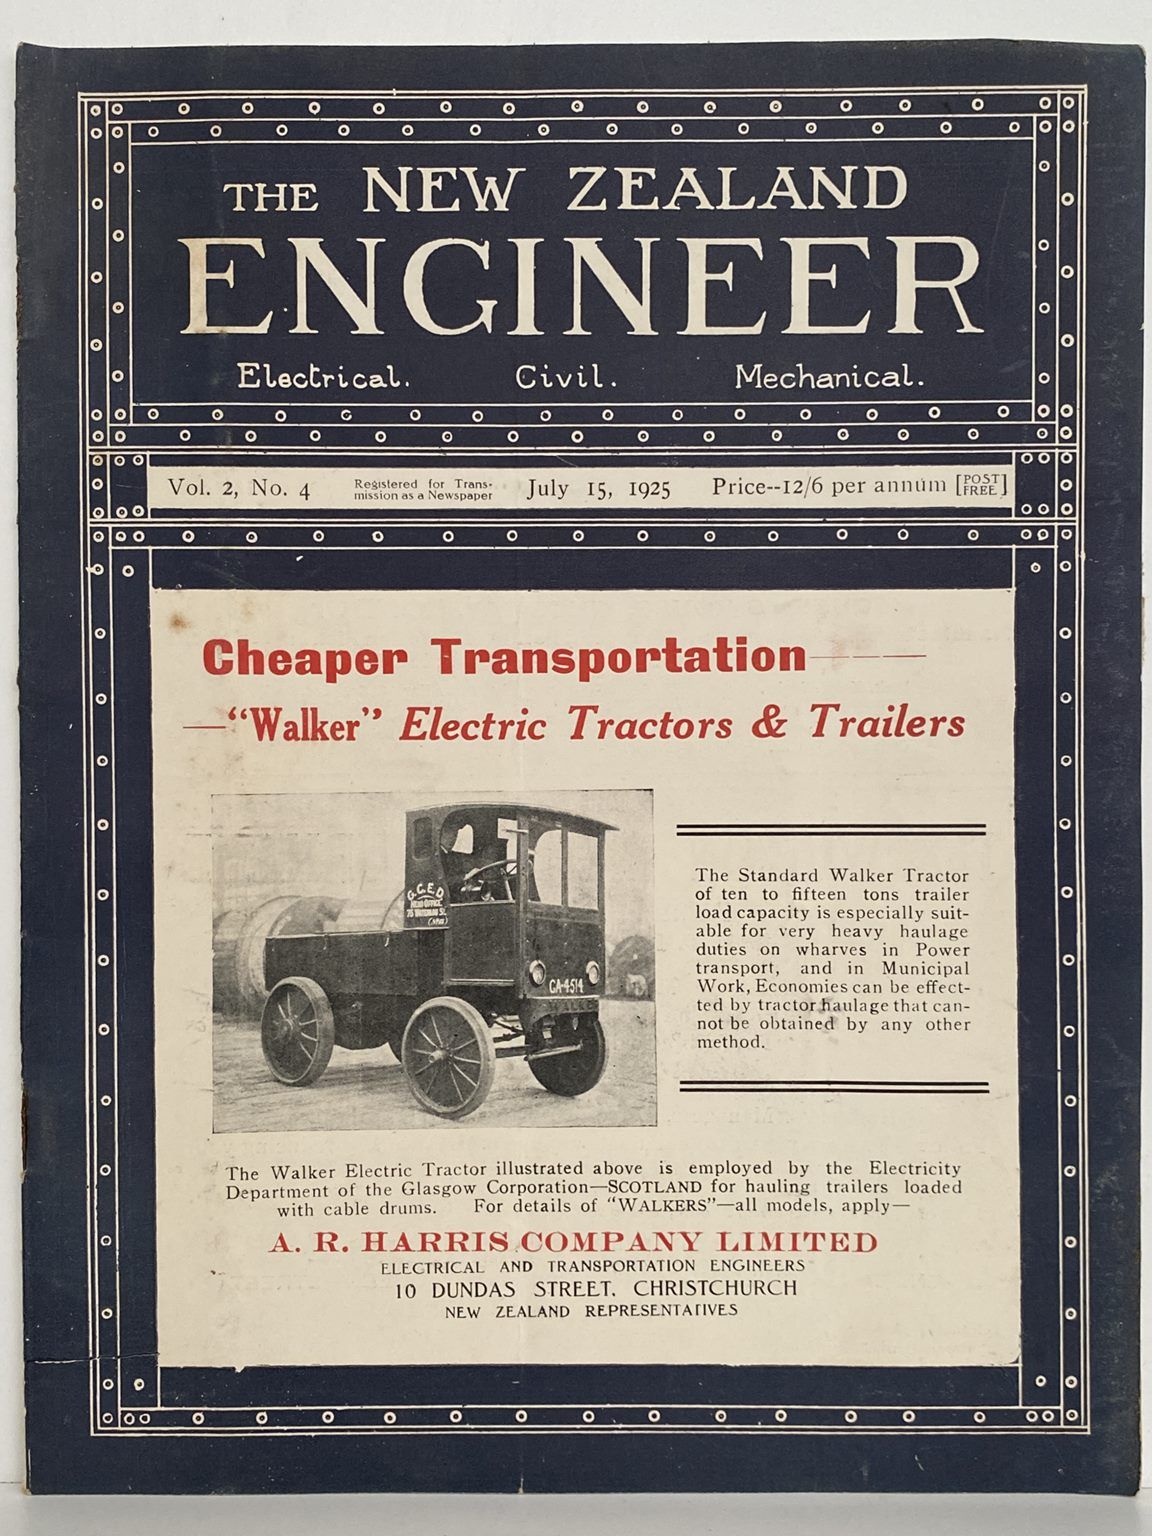 OLD MAGAZINE: The New Zealand Engineer Vol. 2, No. 4 - 15 July 1925